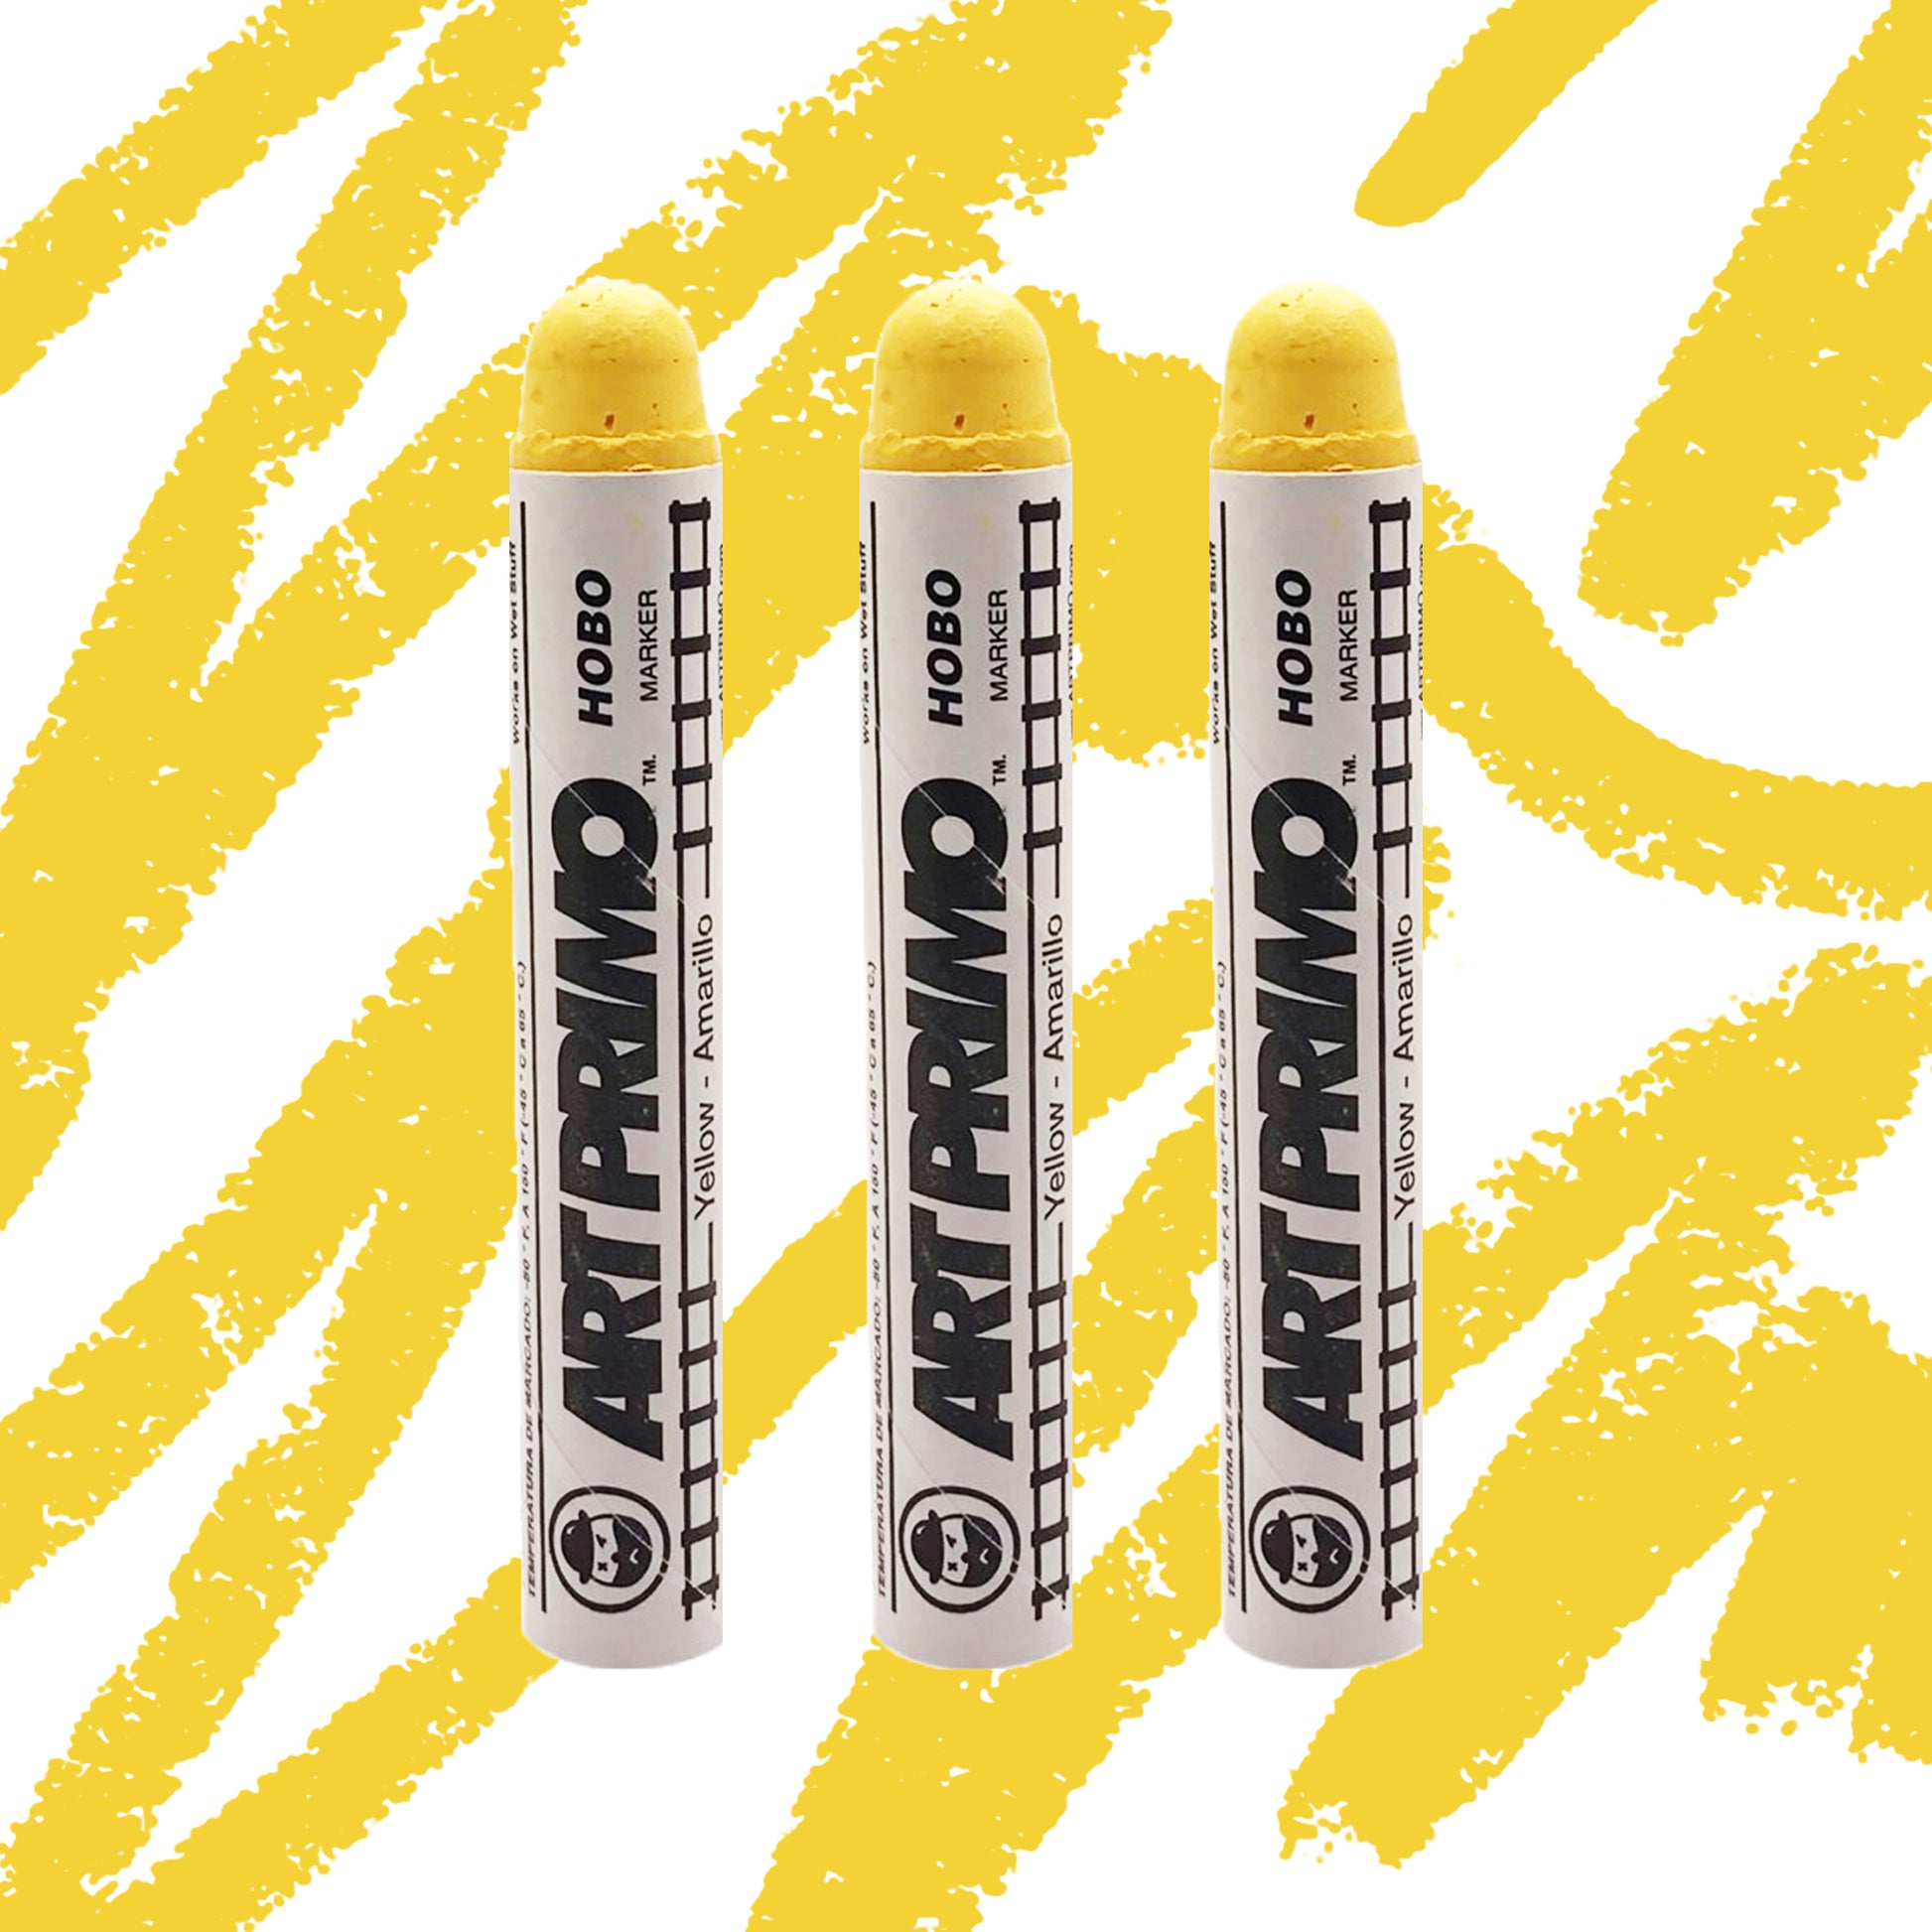 Three yellow crayon type markers with a white label reading "Art Primo"